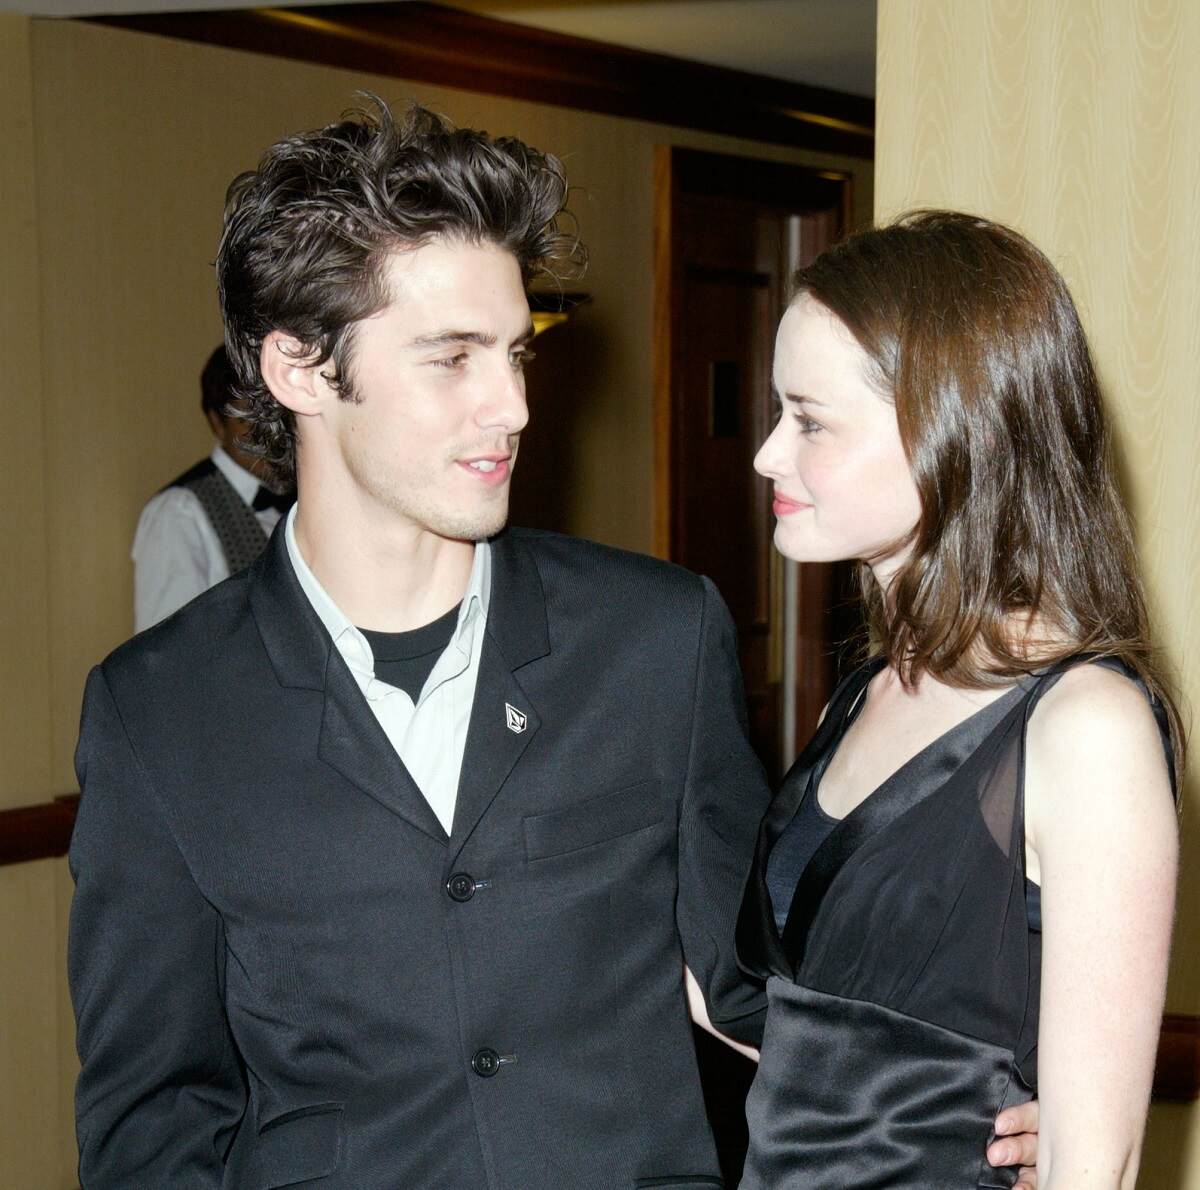 Milo Ventimiglia and Alexis Bledel dressed in black attend the 2003-2004 WB Upfront Previews together. Ventimiglia and Bledel played Jess Mariano and Rory Gilmore in 'Gilmore Girls'